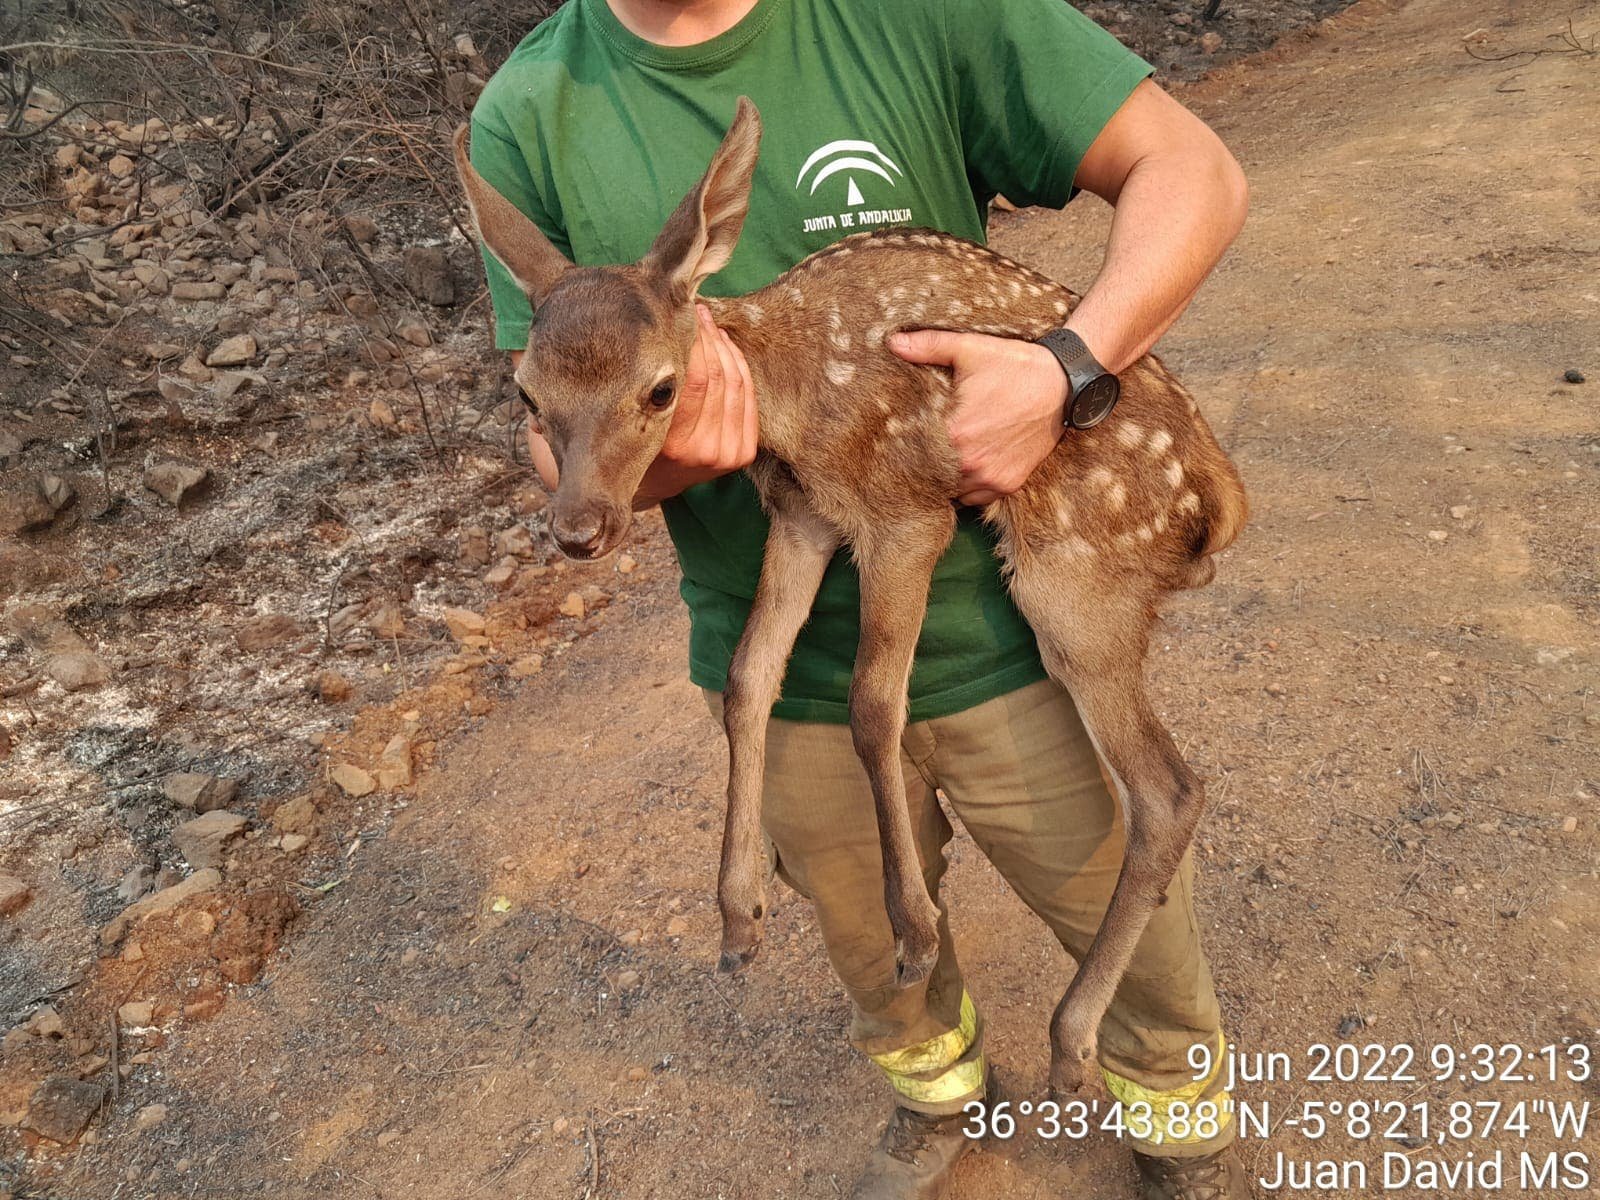 Incredible Video: Young Deer Miraculously Saved from Raging Wildfire in Spain's Costa del Sol Hills! - fuziwb3waaaeciu - Environmental and Conservation Efforts -